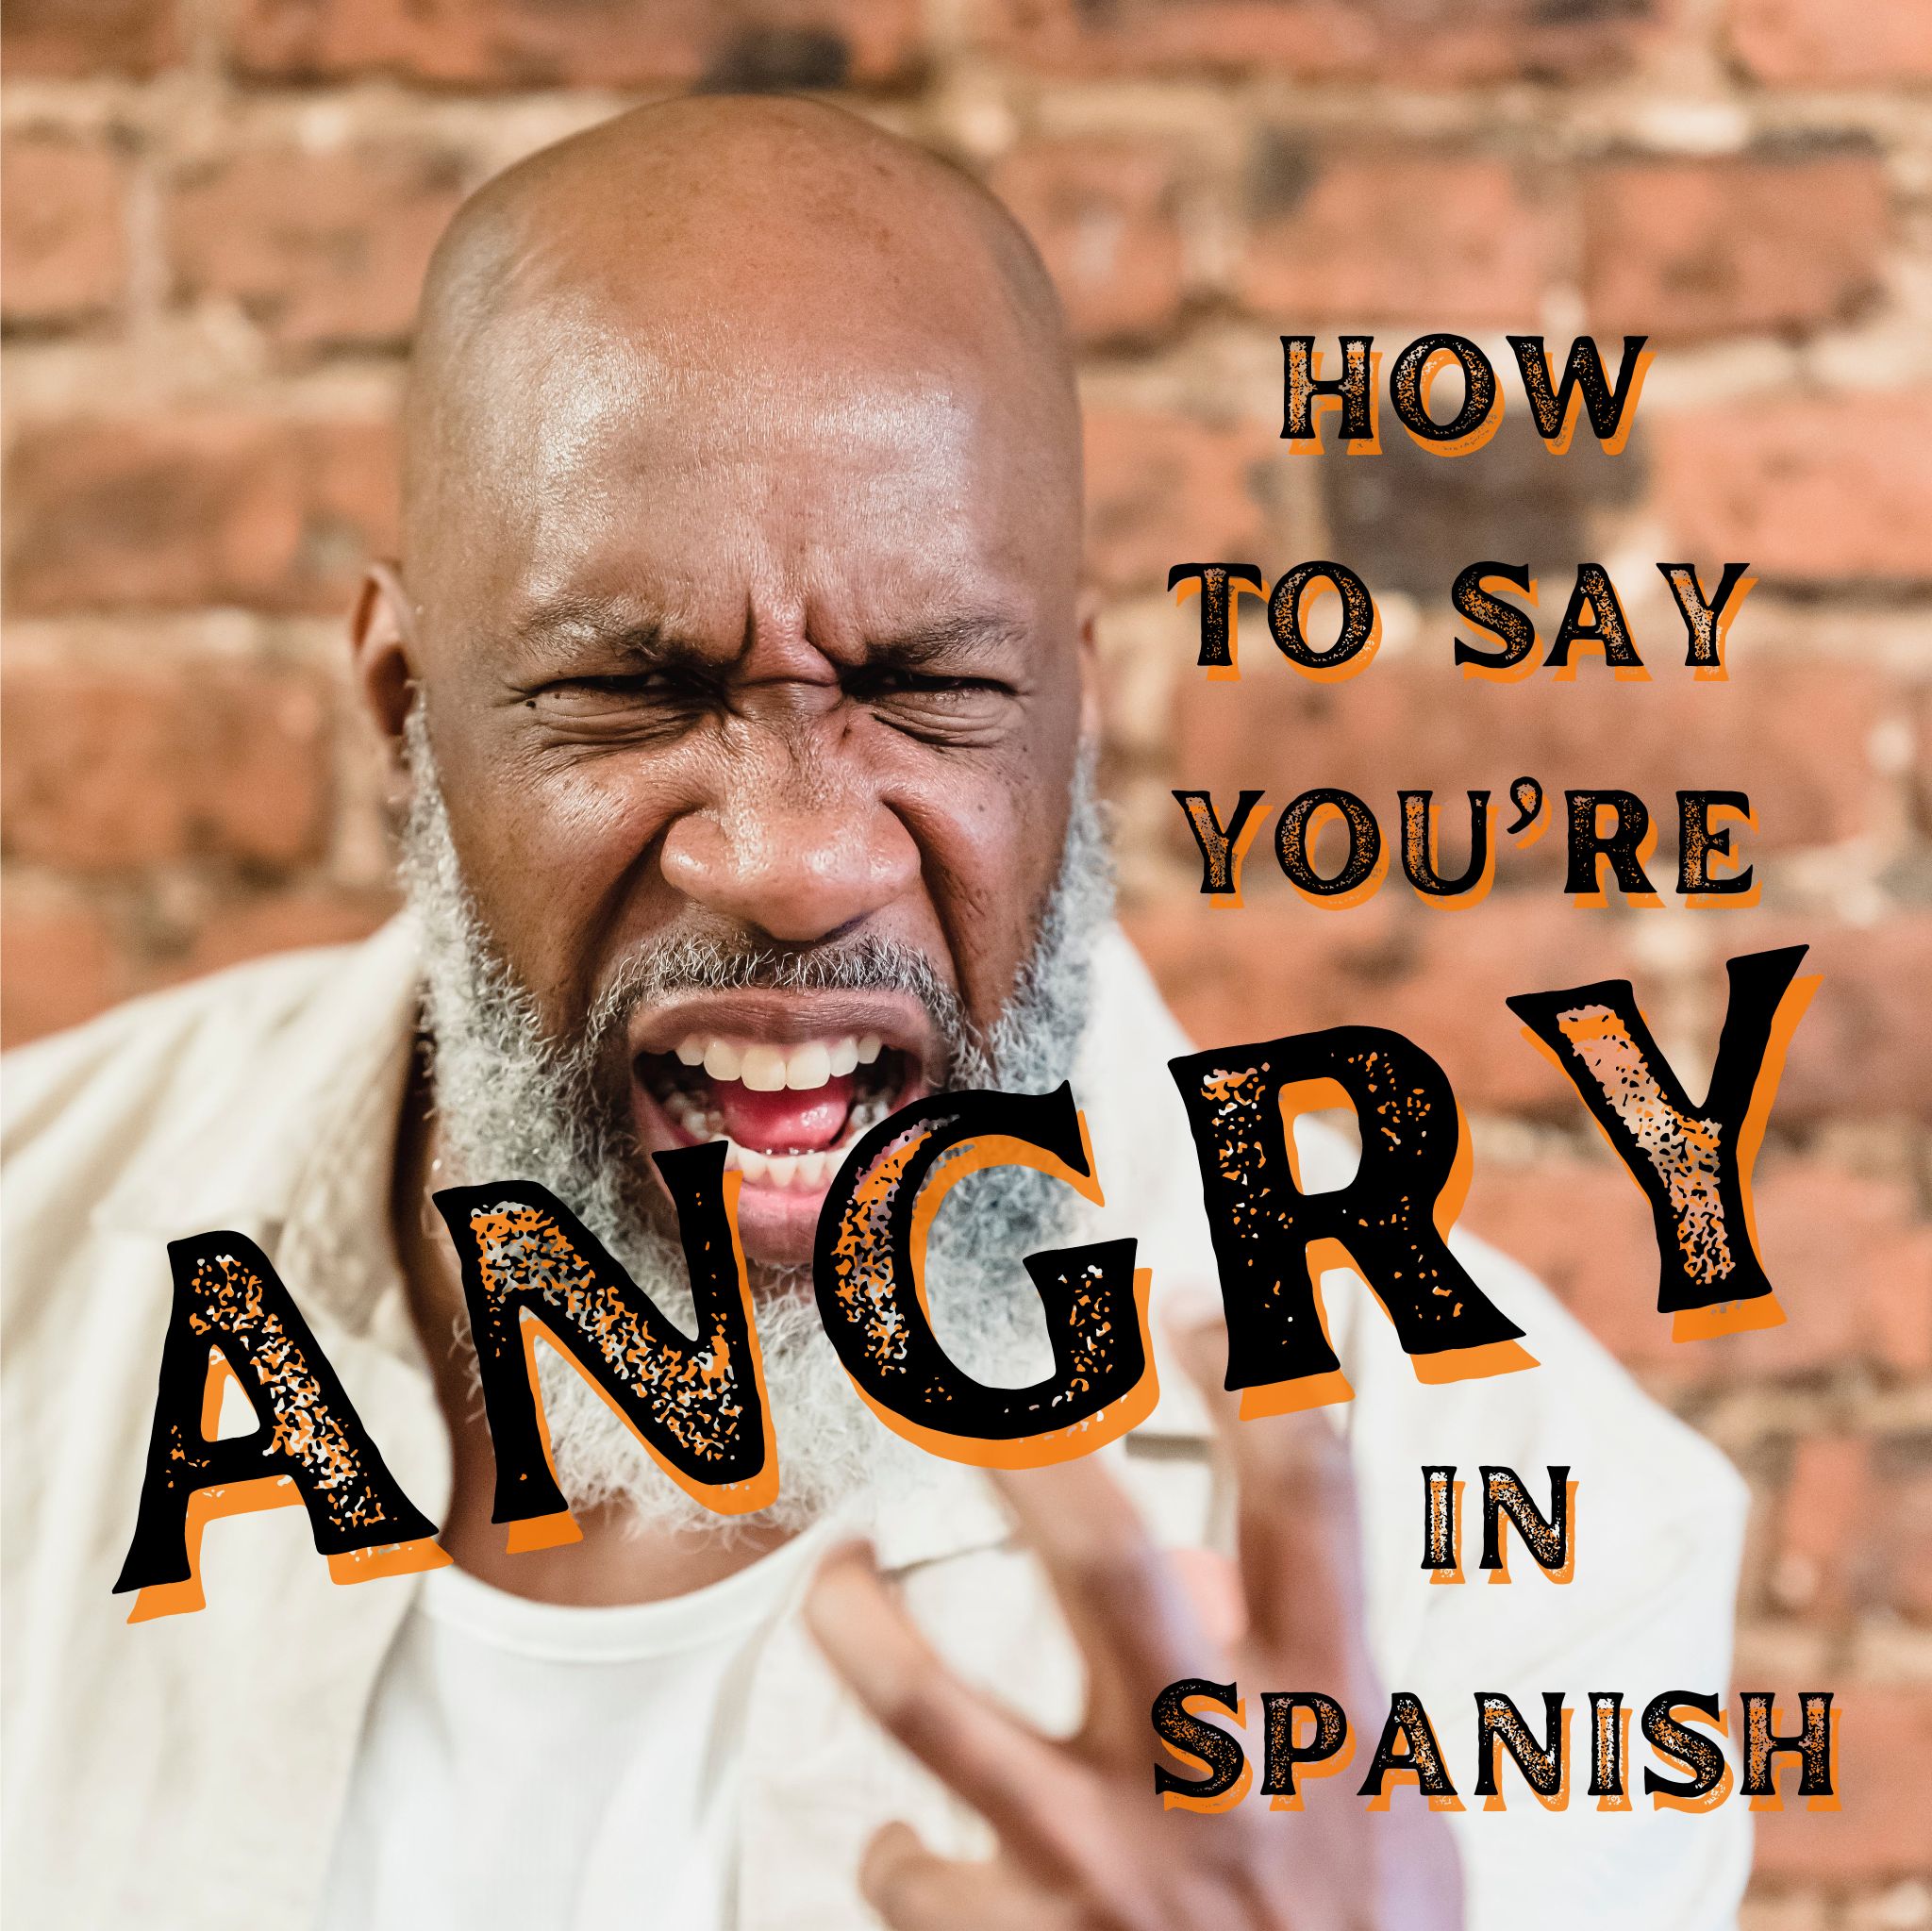 How to say you're ANGRY in Spanish